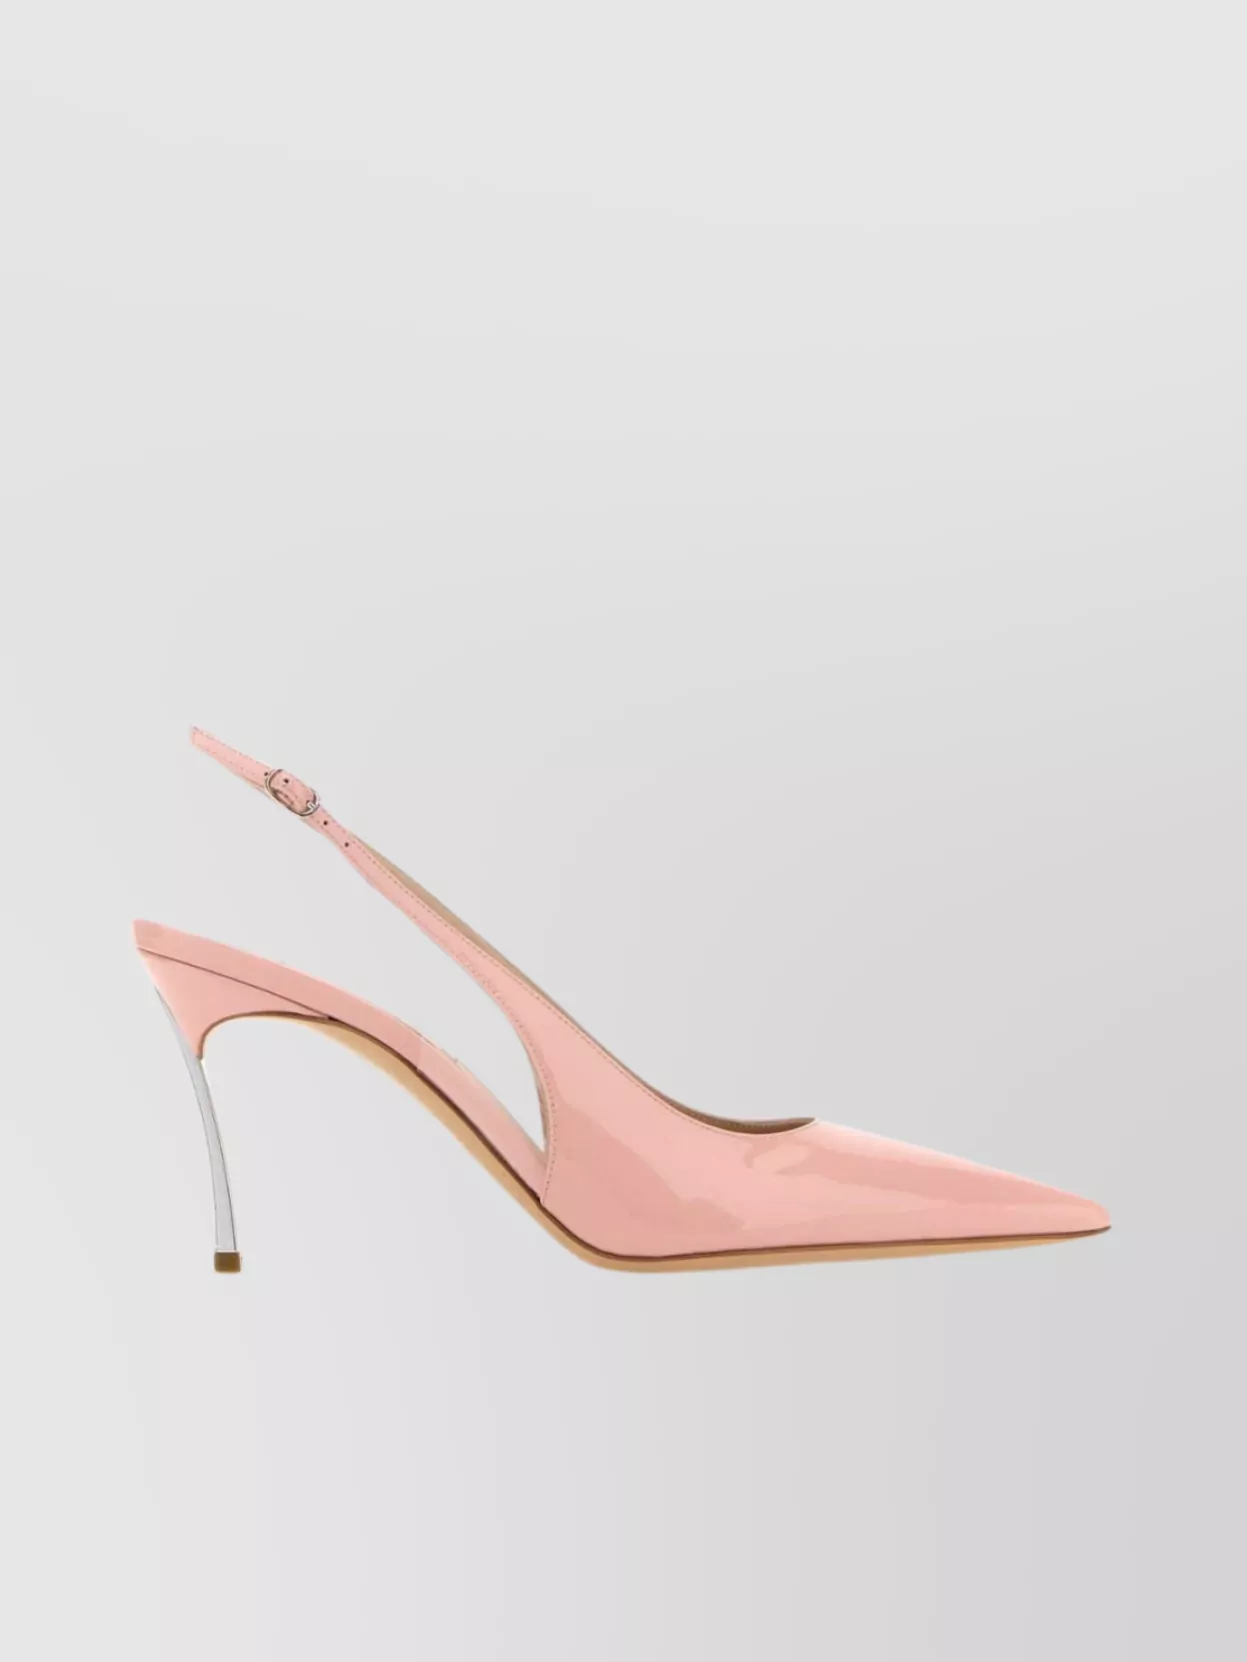 Shop Casadei Leather Minou Pumps With Pointed Toe And Stiletto Heel